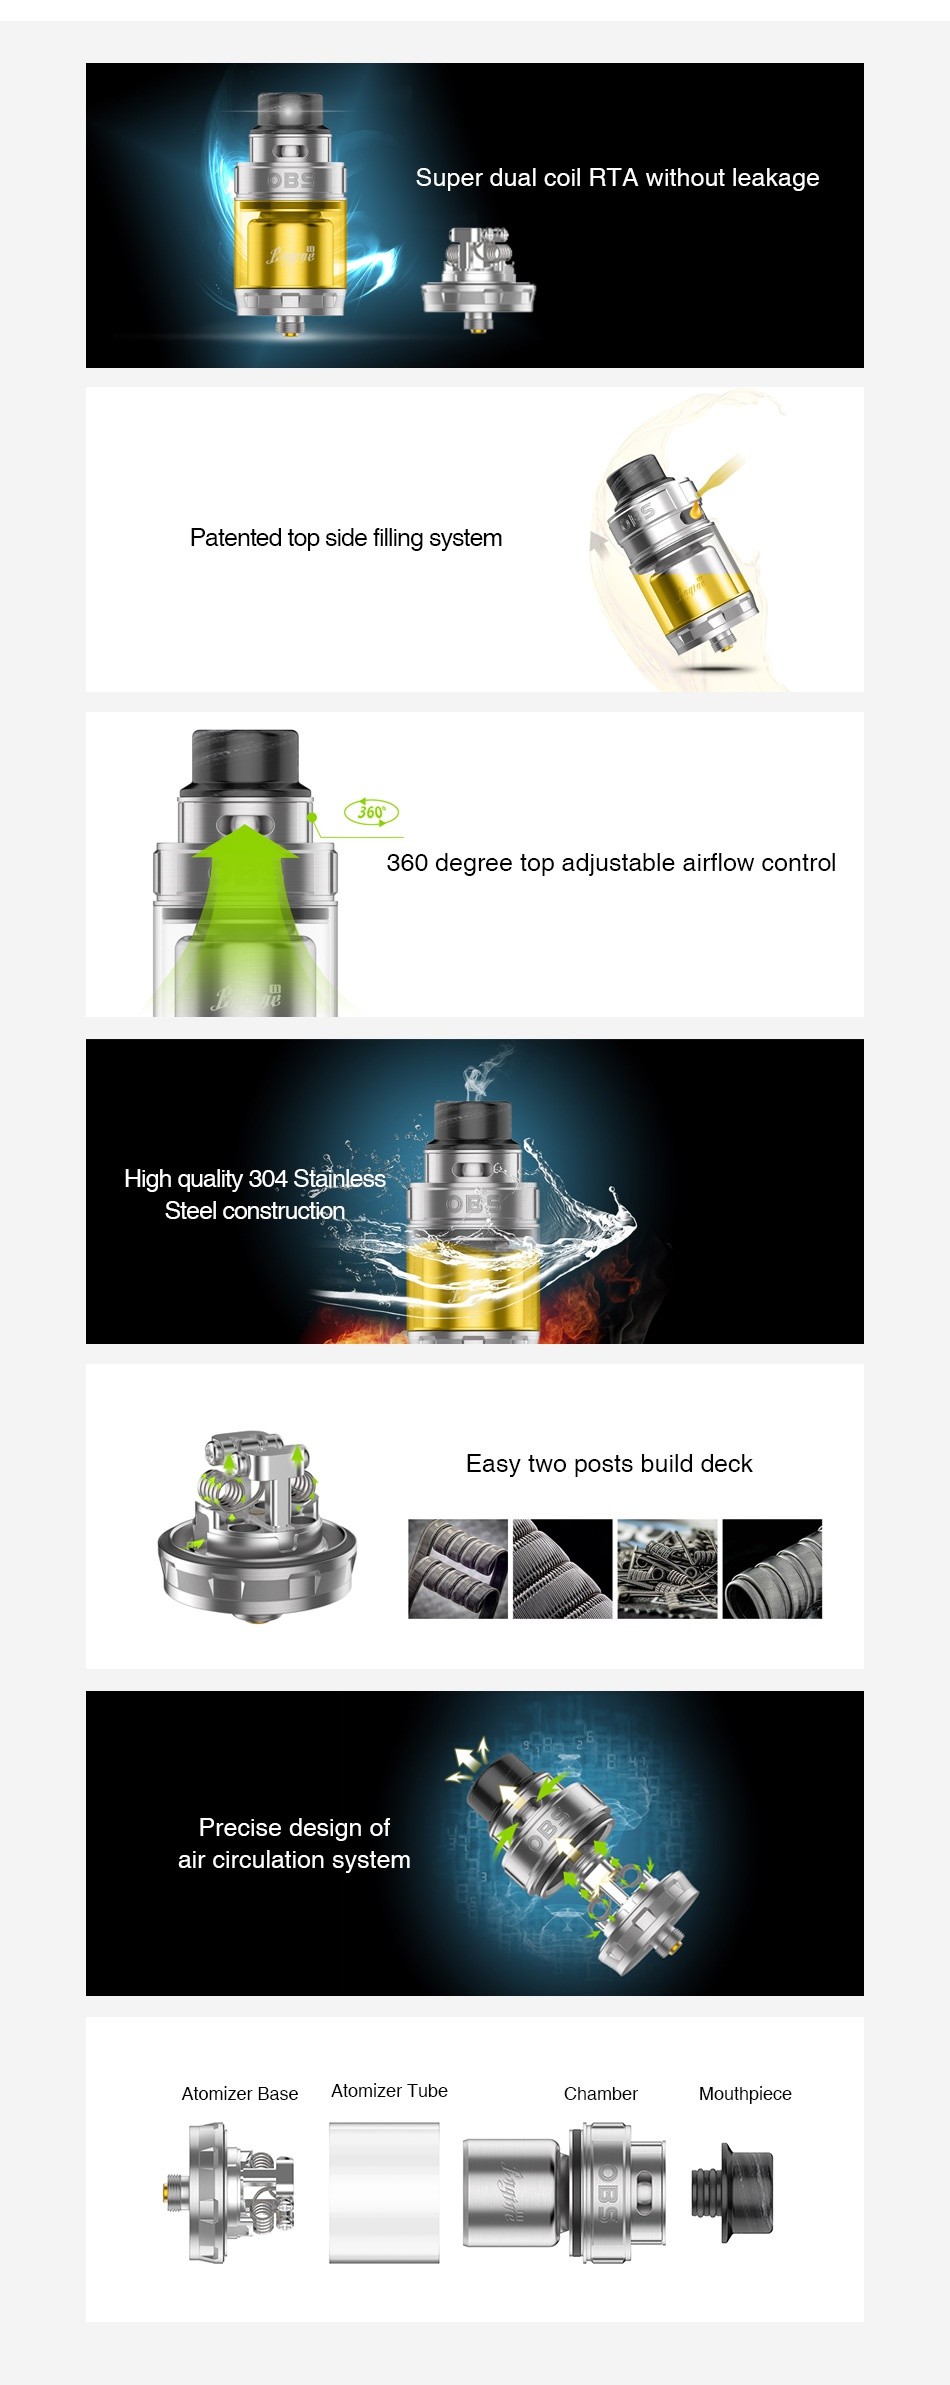 OBS Engine 2 RTA 5ml Super dual coil RTA without leakage Patented top side filling system 360 degree top adjustable airflow control High quality 304 Stainless Steel canstruction Easy two posts build deck     P design of air circulation system Atomizer basc Alor izer Tute Chambcr MouthpIece